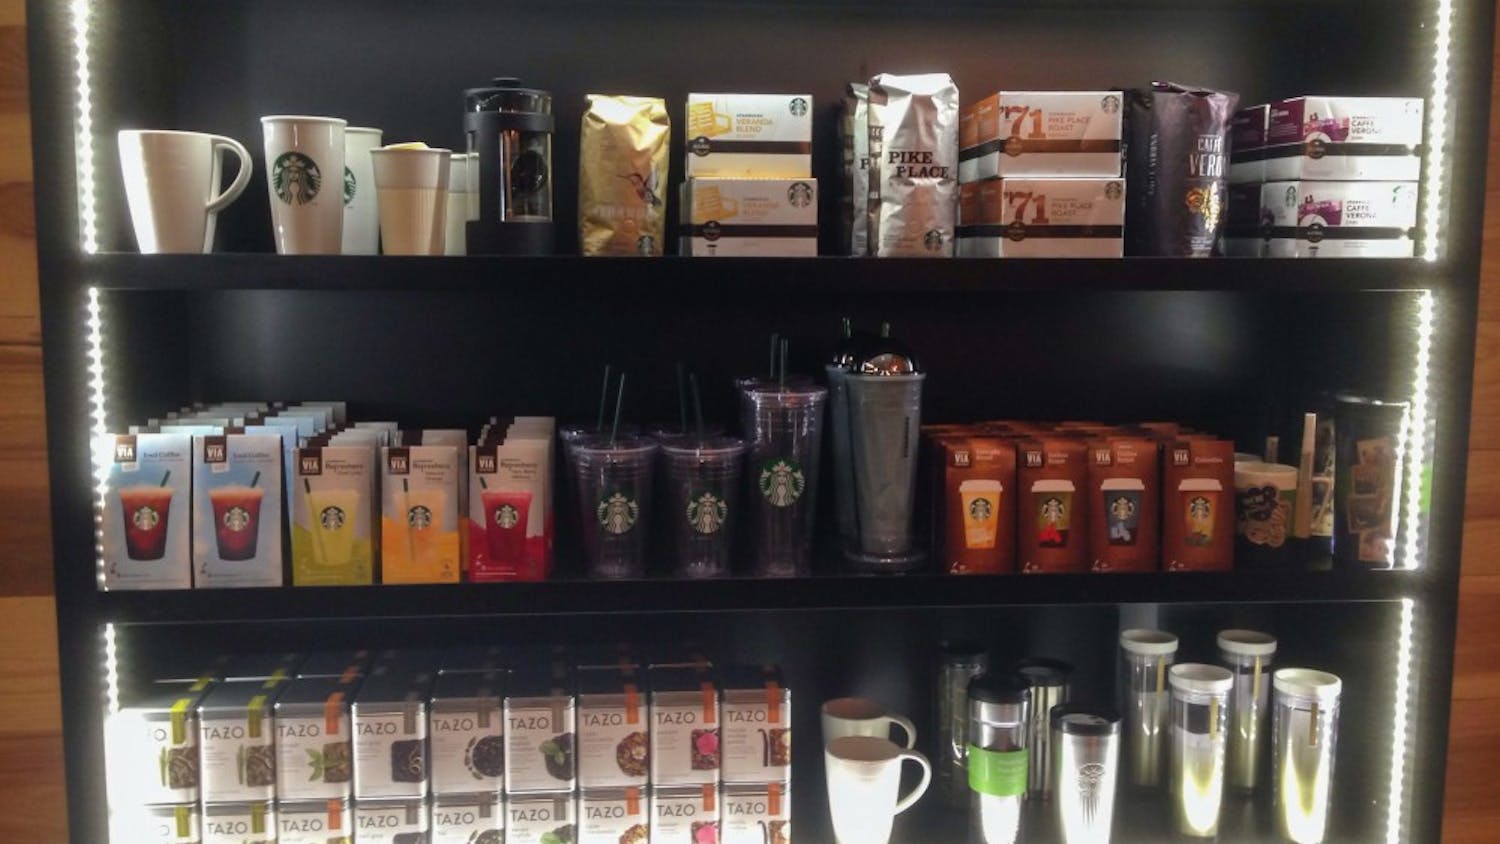 	Three shelves of Starbucks products light up the store as customers enter.